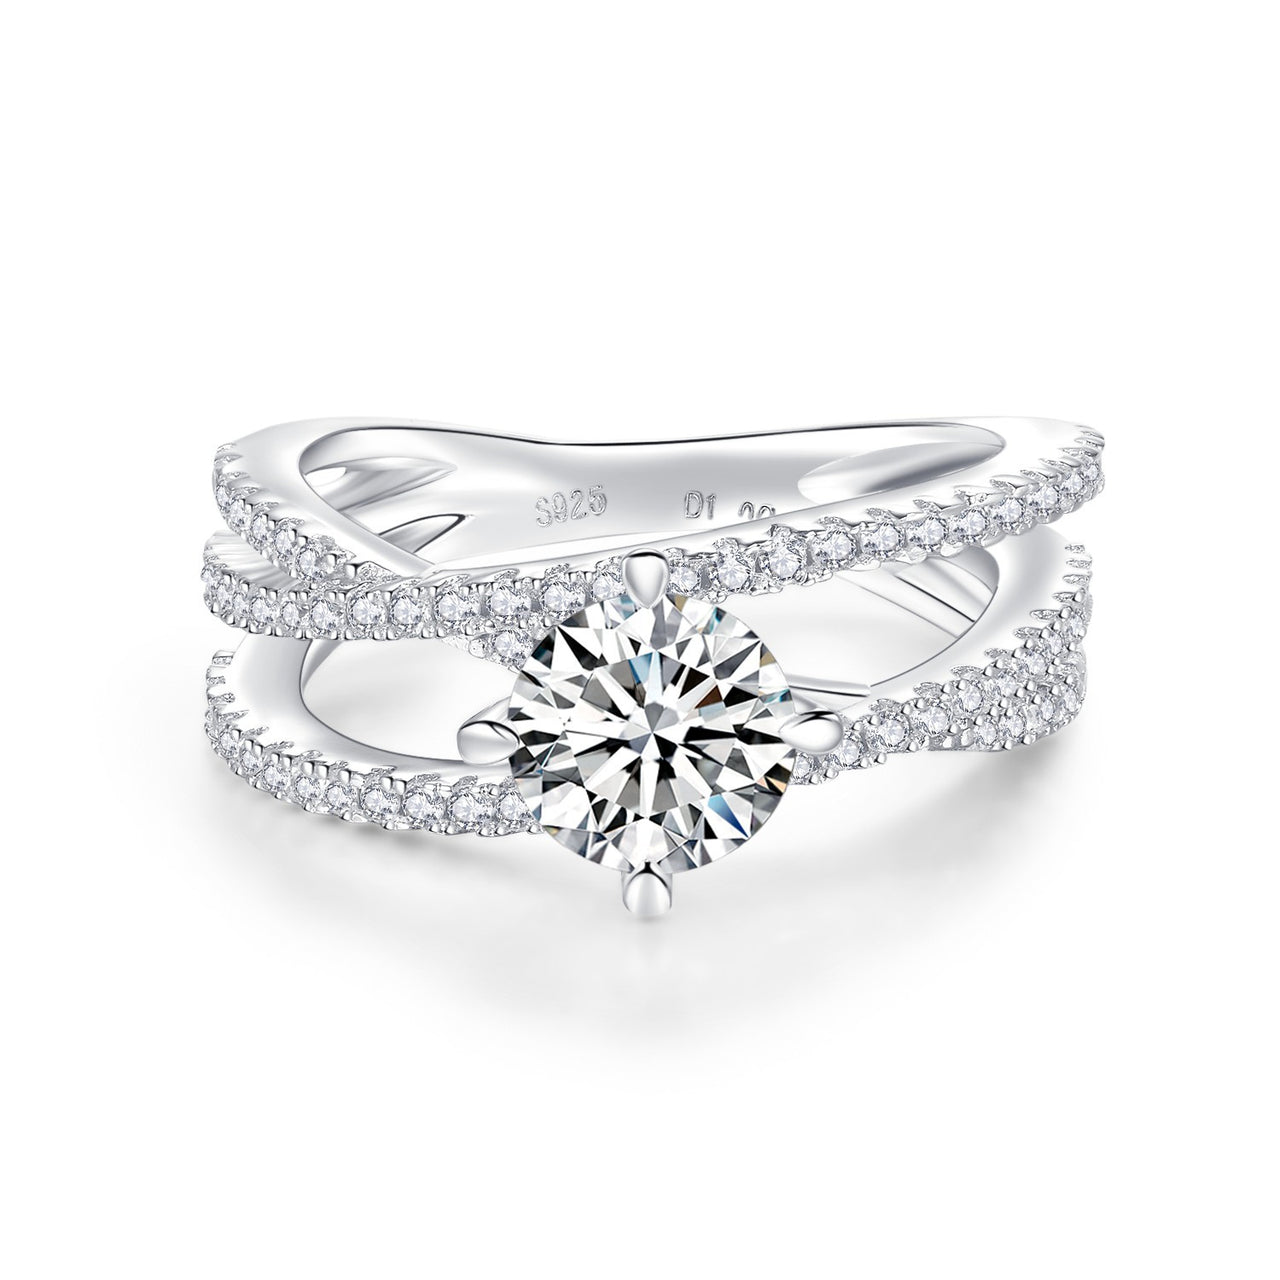 IE1013 INTERWOVEN MOISSANITE ENGAGEMENT RING IN STERLING SILVER